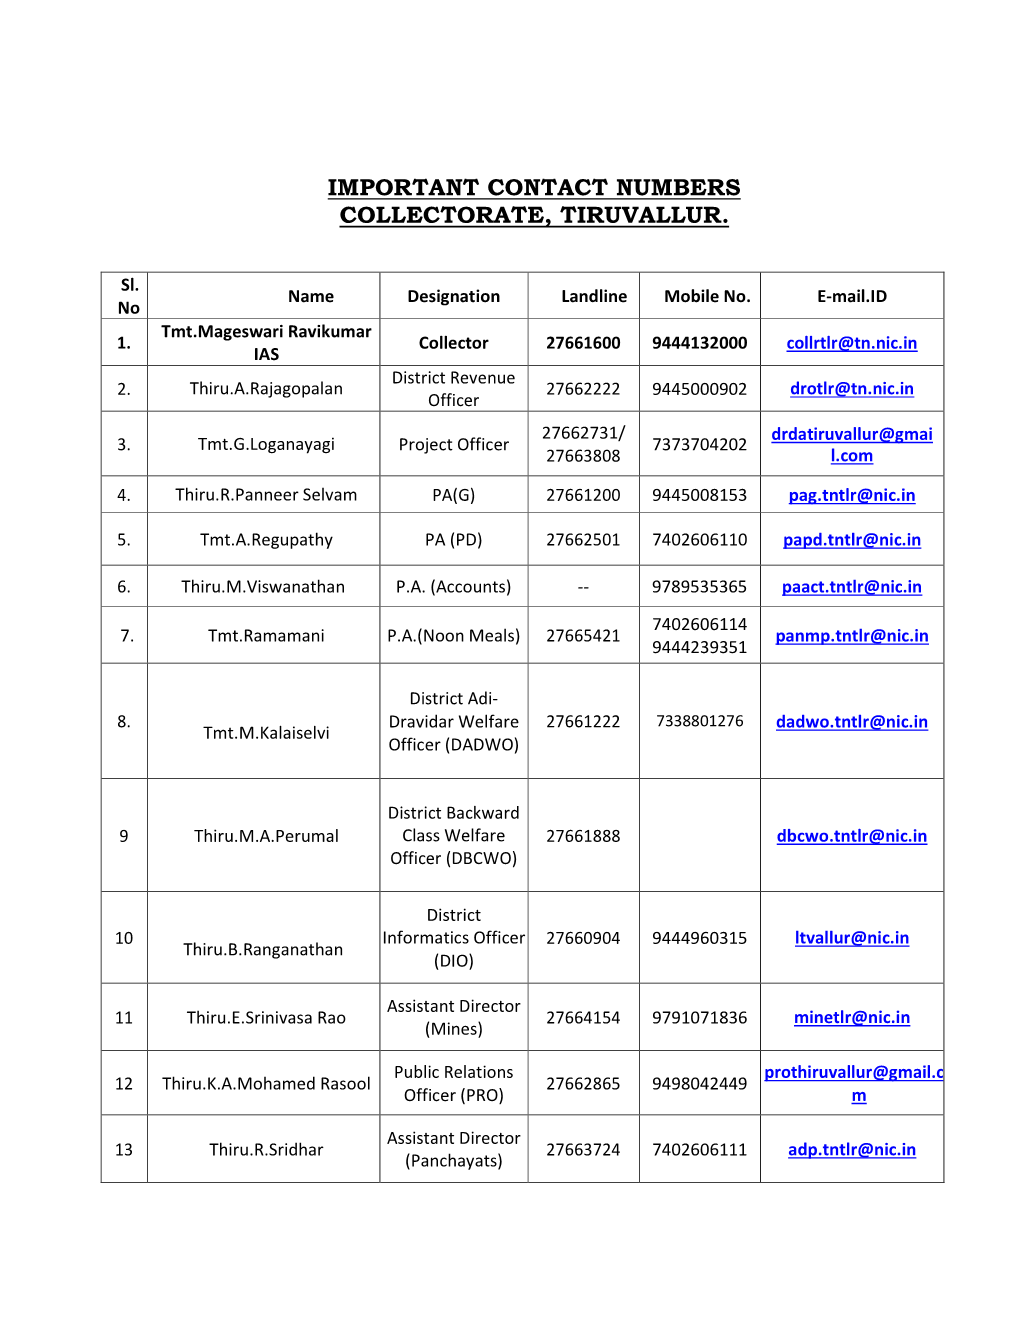 Important Contact Numbers Collectorate, Tiruvallur